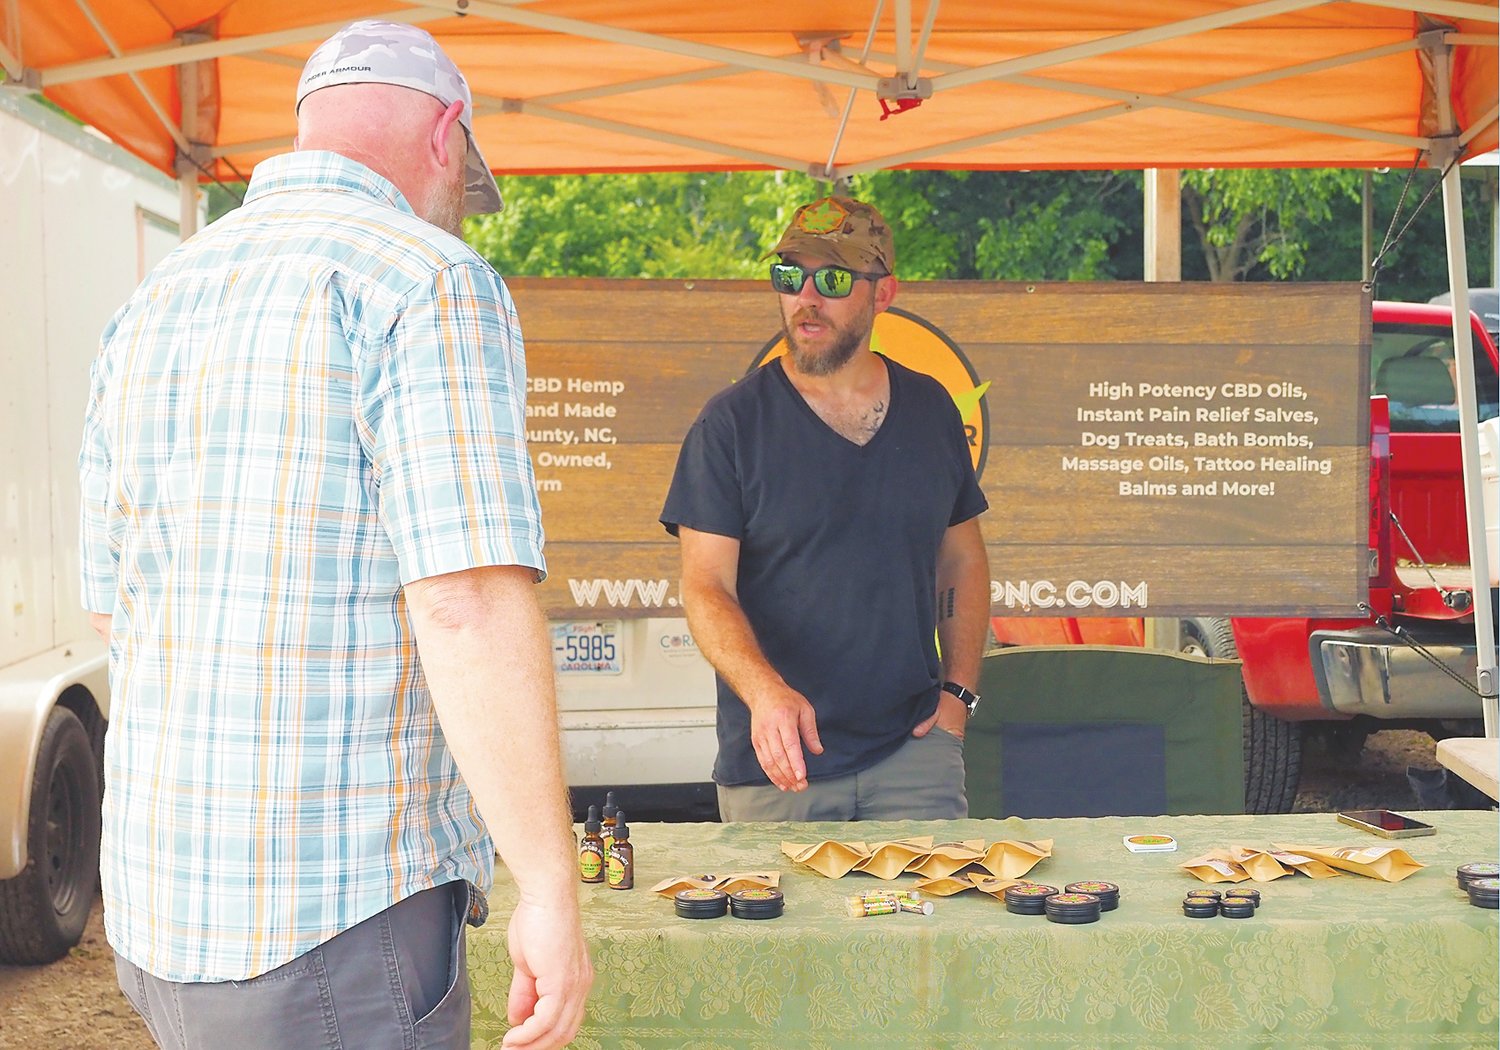 Rocky River Hemp, one of the regulars at the Pittsboro Farmers Market, is a family business in Chatham County offering a variety of hemp-based products. Co-owner Sam Brownfield spoke with a customer at last week's market.